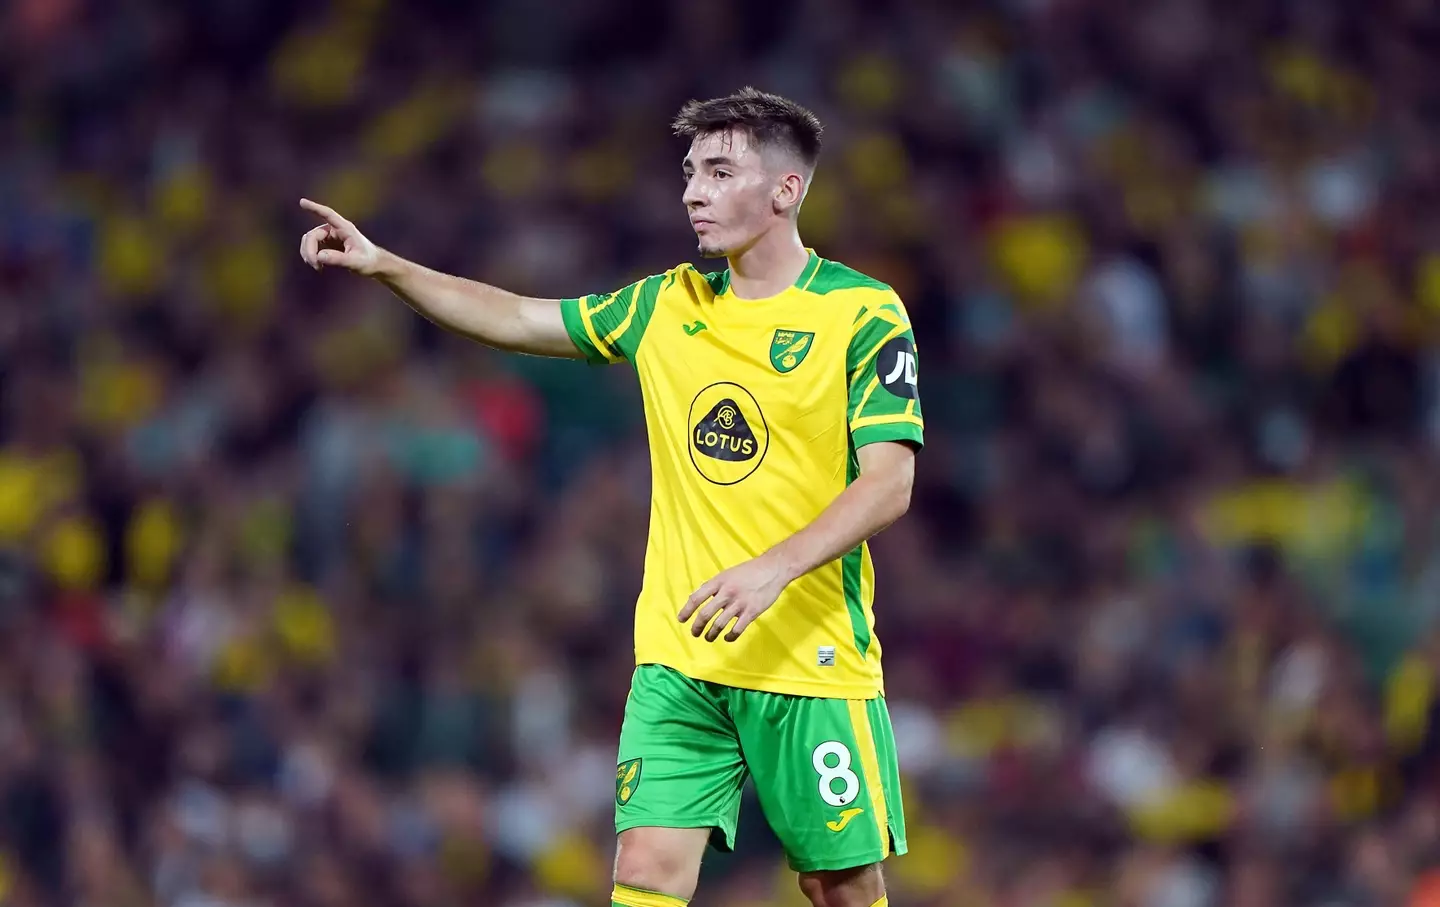 Norwich City's Billy Gilmour in action during his loan spell at the Canaries. (Alamy)